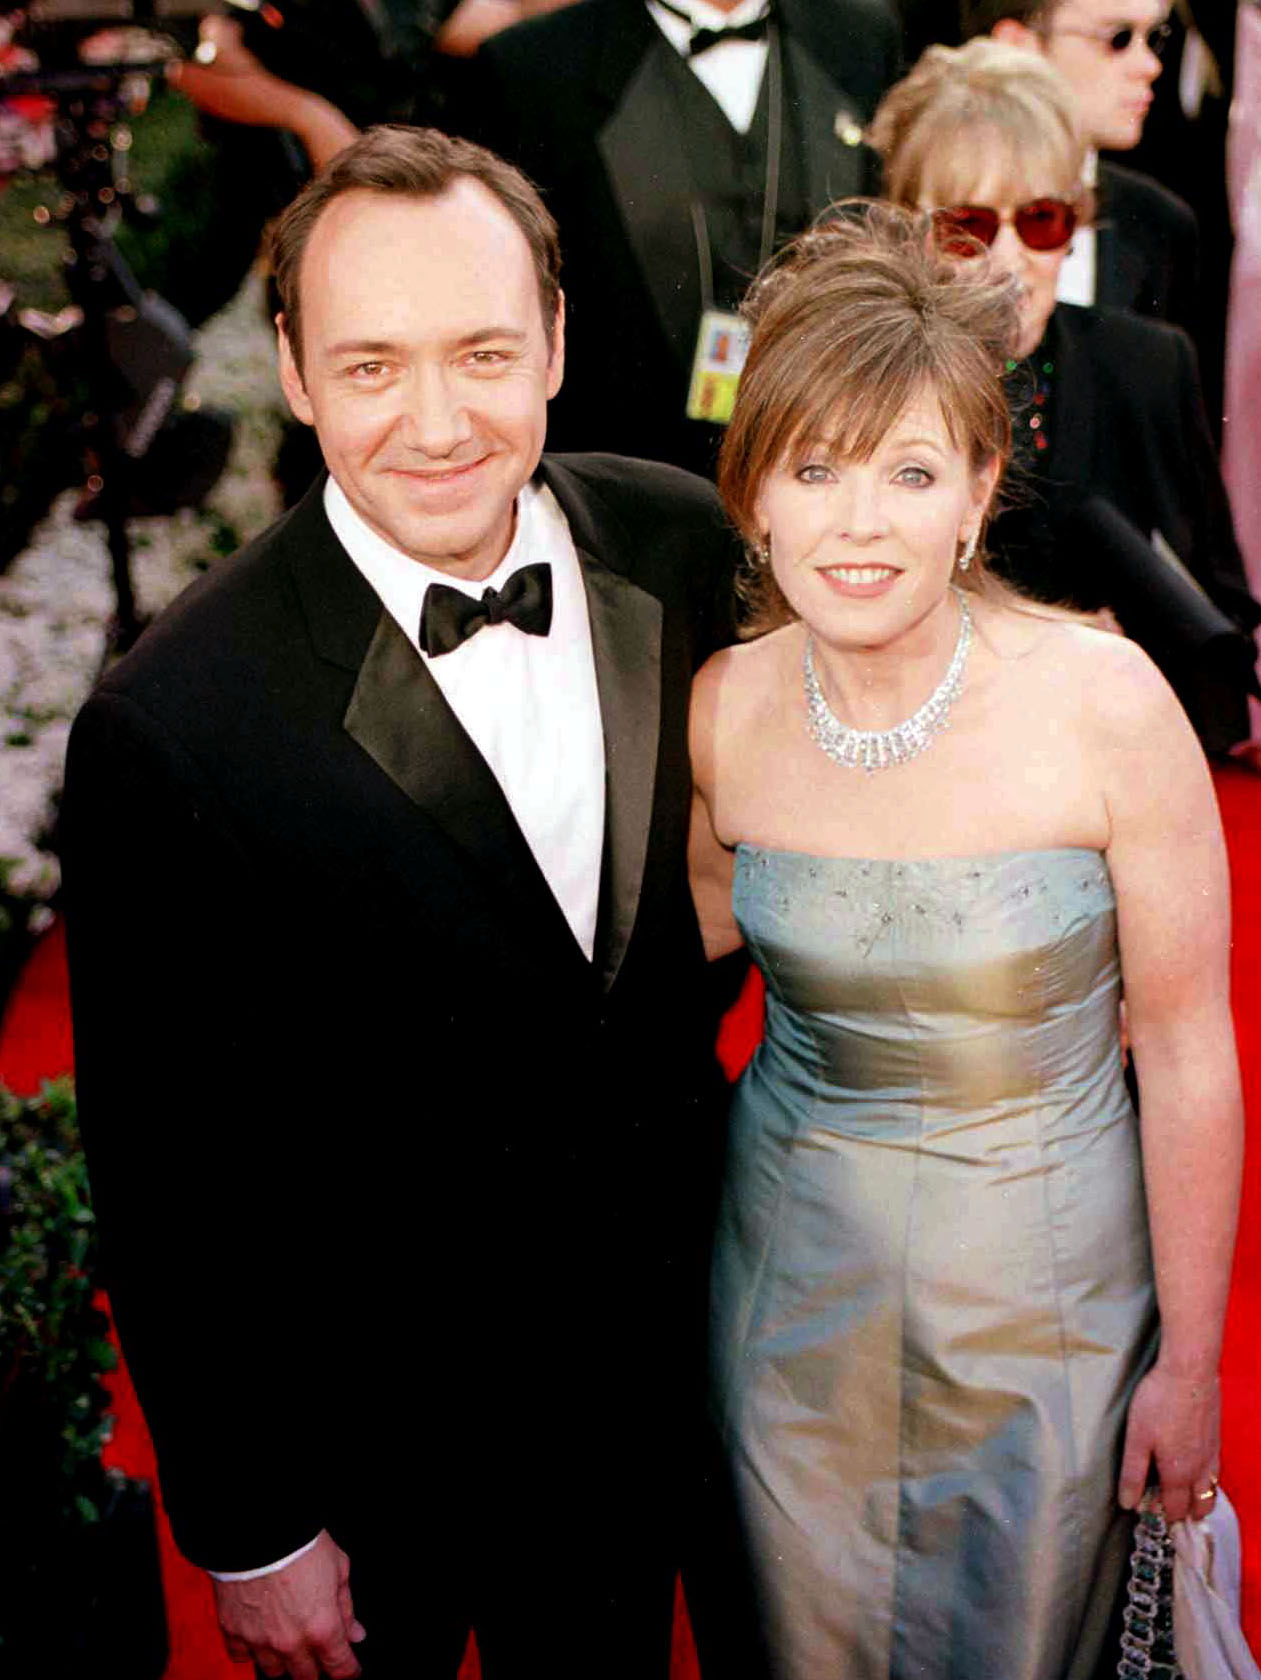 Kevin Spacey and Dianne Dreyer arrive at the 72nd Annual Academy Award at the Shrine Auditorium in 2000 in Los Angeles, California. | Source: Getty Images